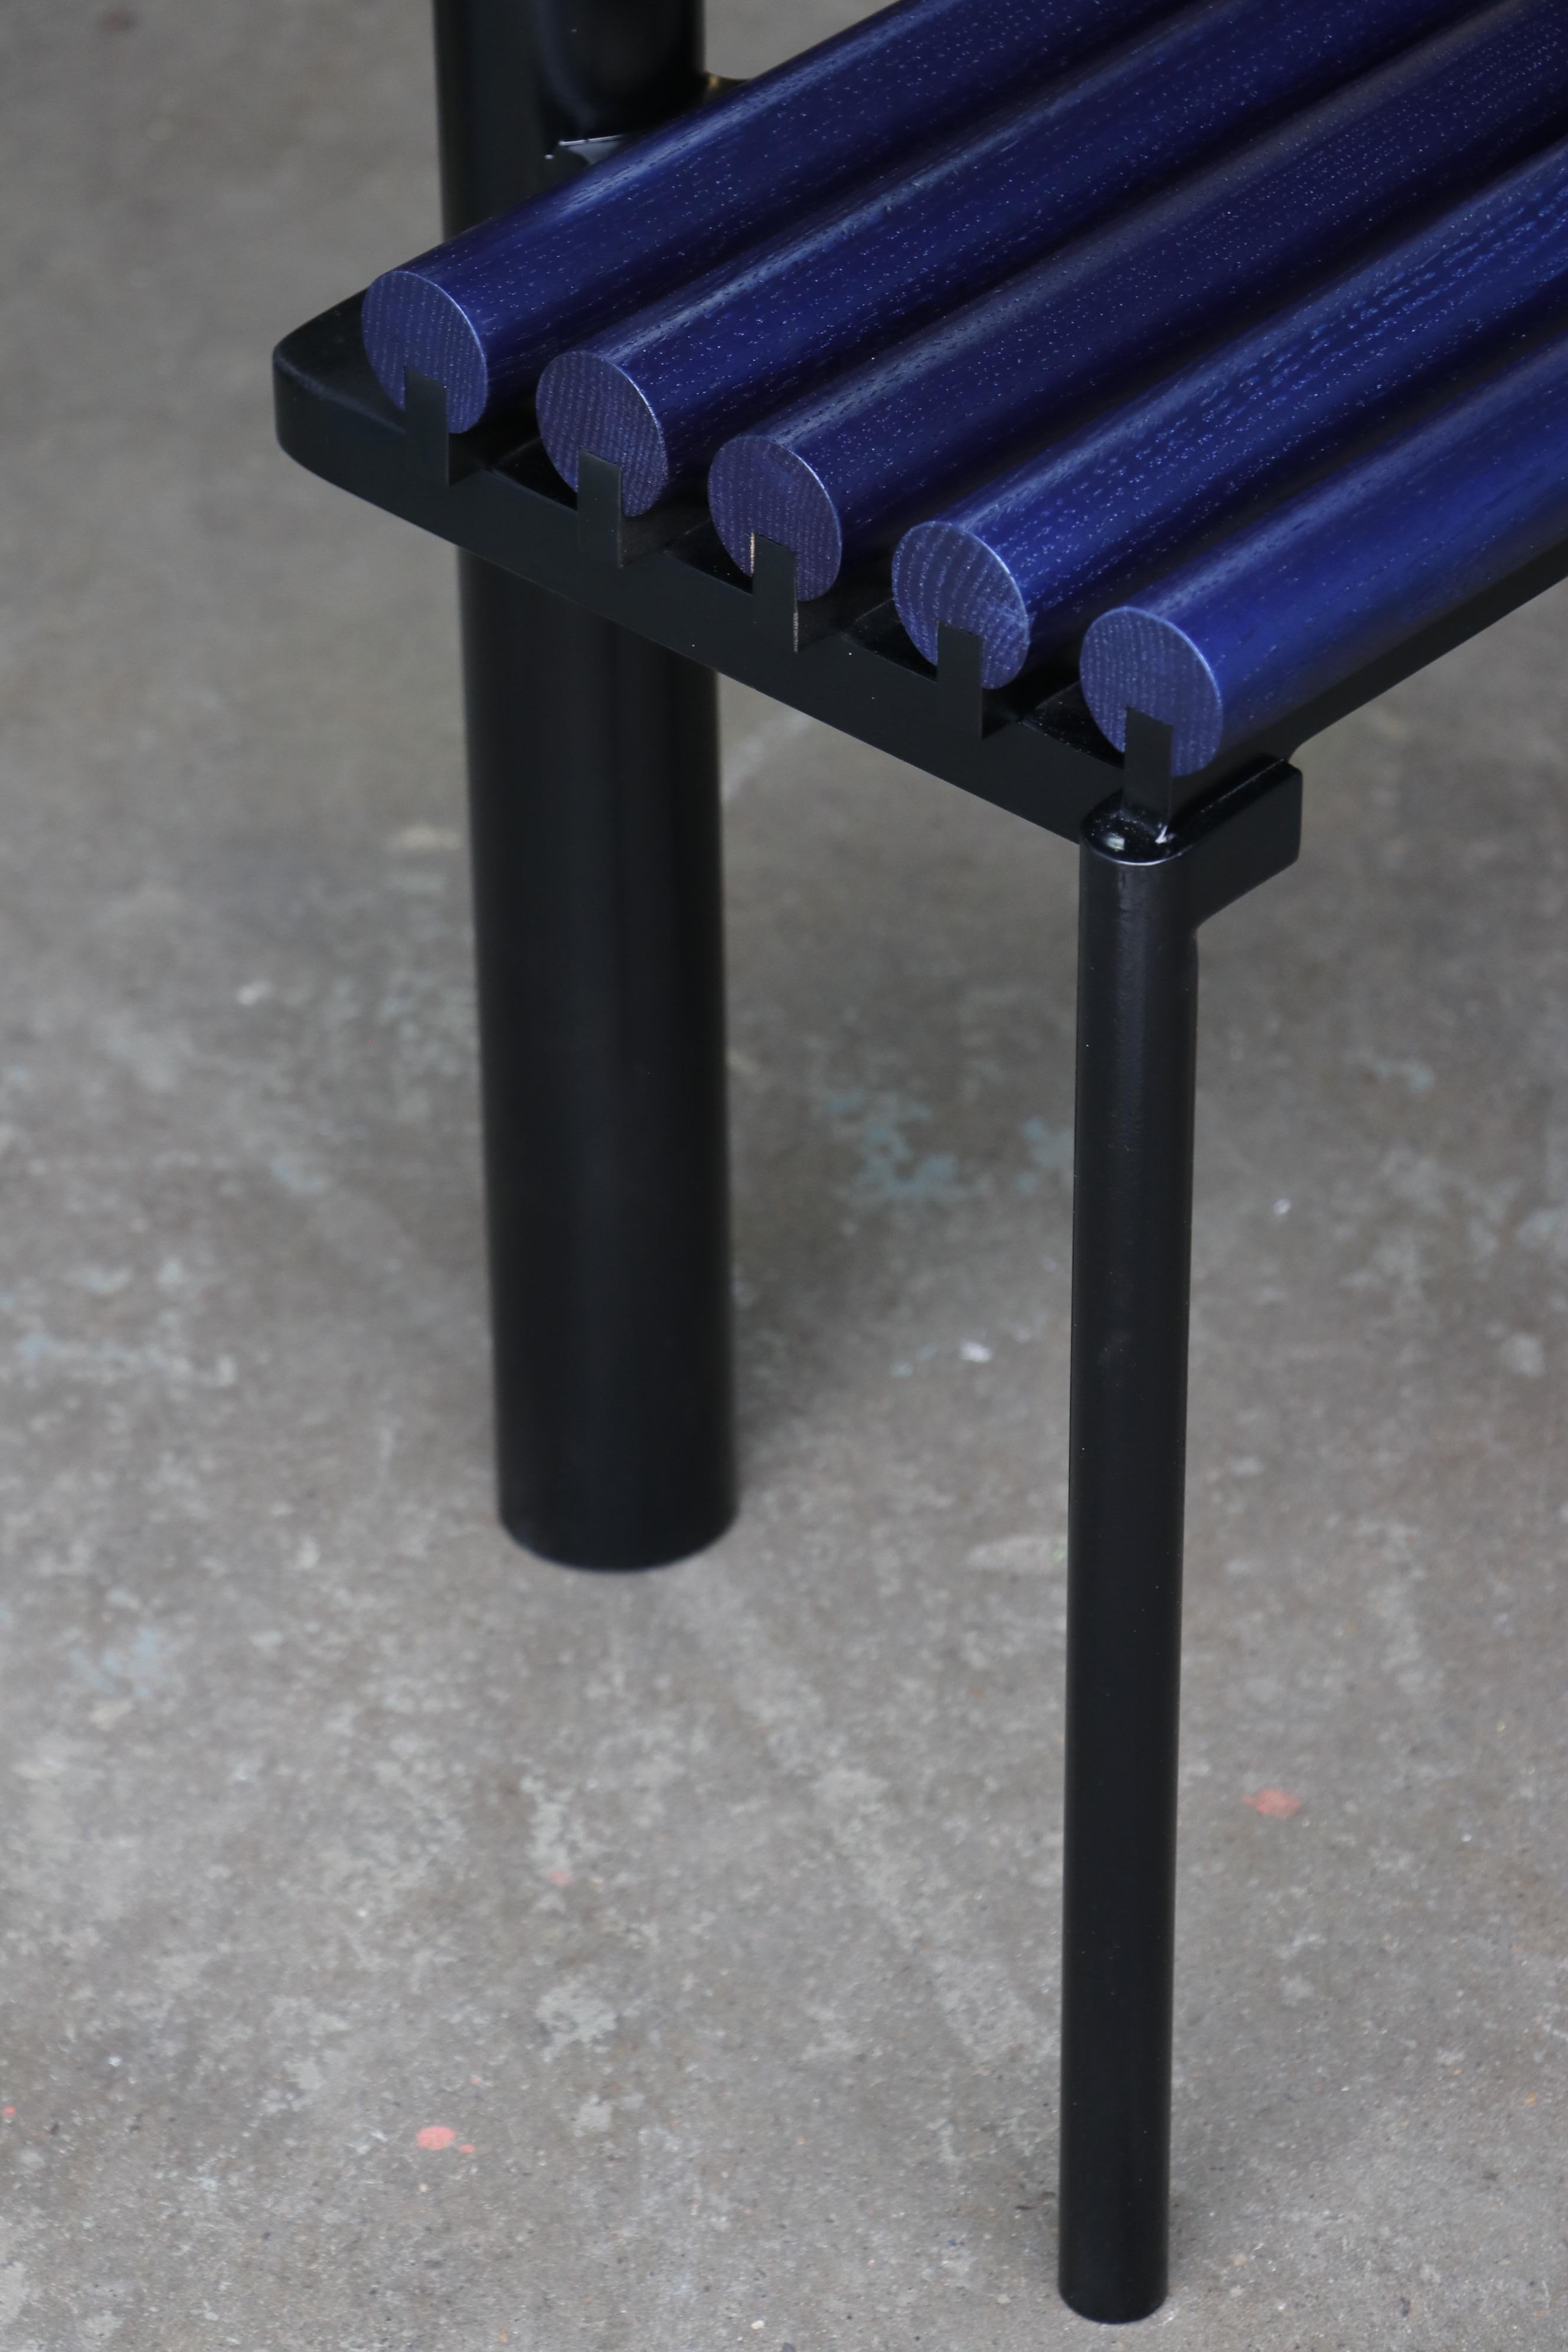 Contemporary Chair 9, Sculptural Chair in Steel and Oak, Metallic Blue and Black Painted For Sale